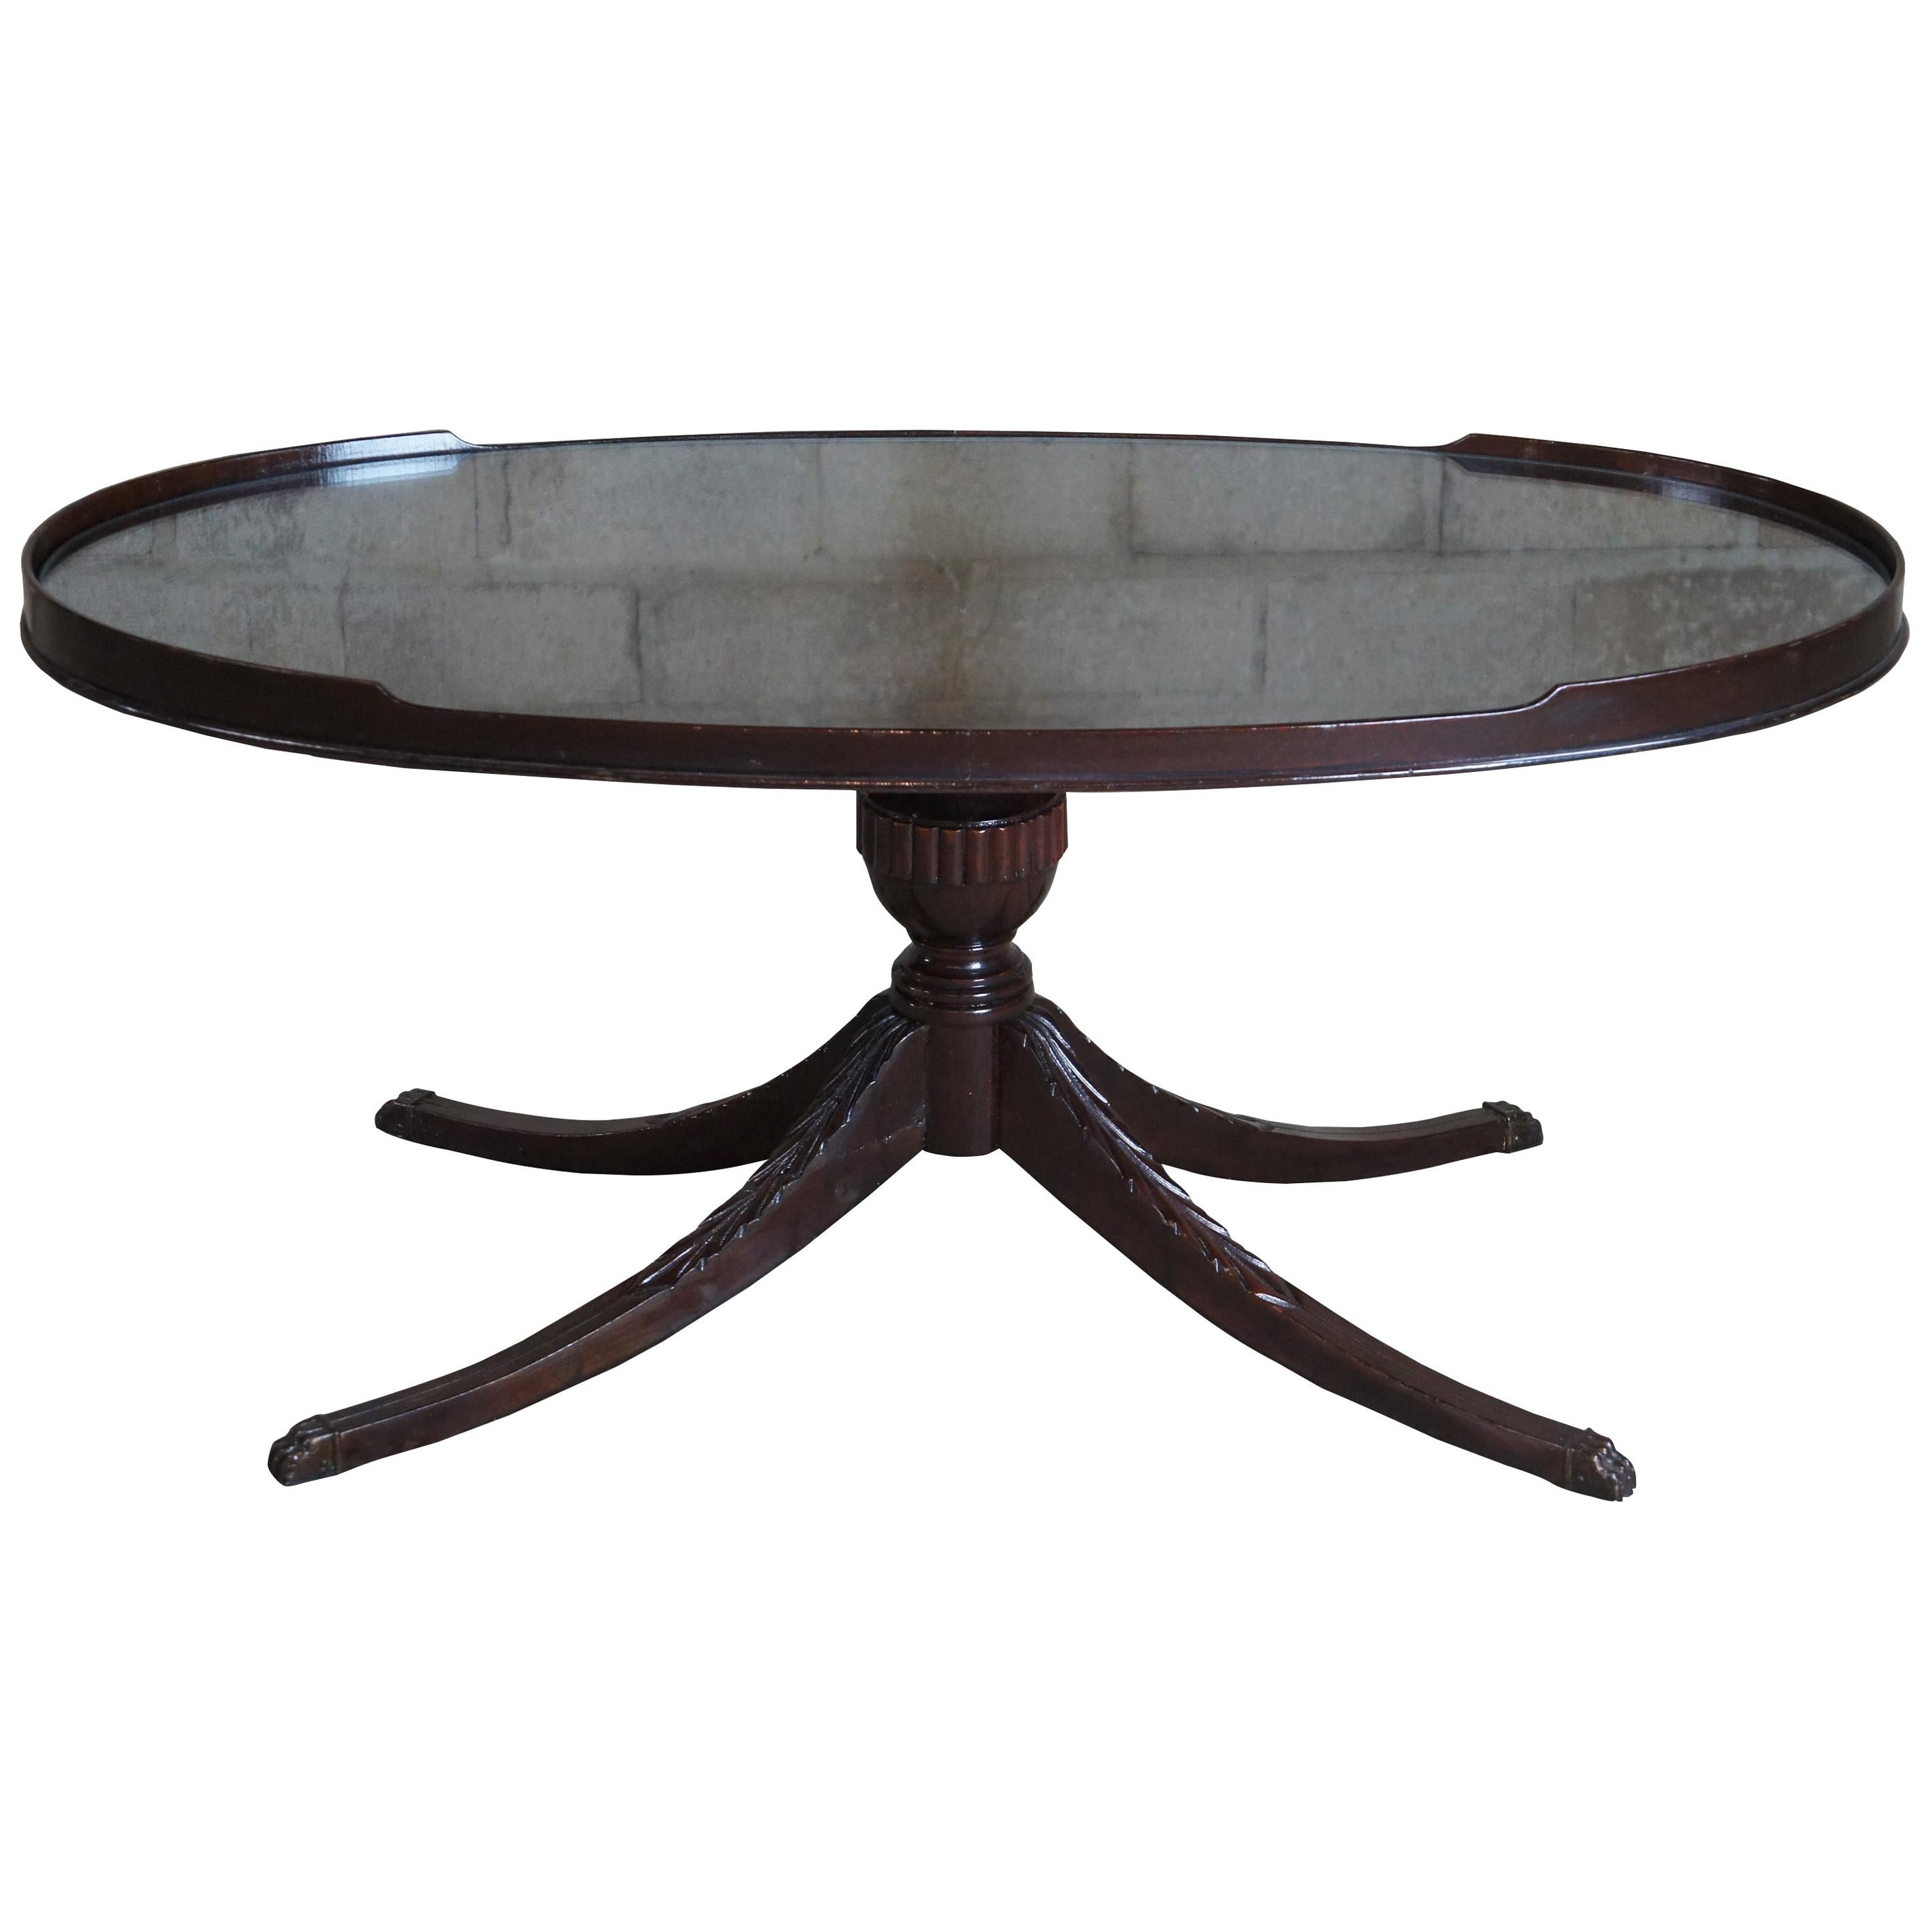 Antique Oval Mahogany Duncan Phyfe Pedestal Coffee Tea Table w Glass Top